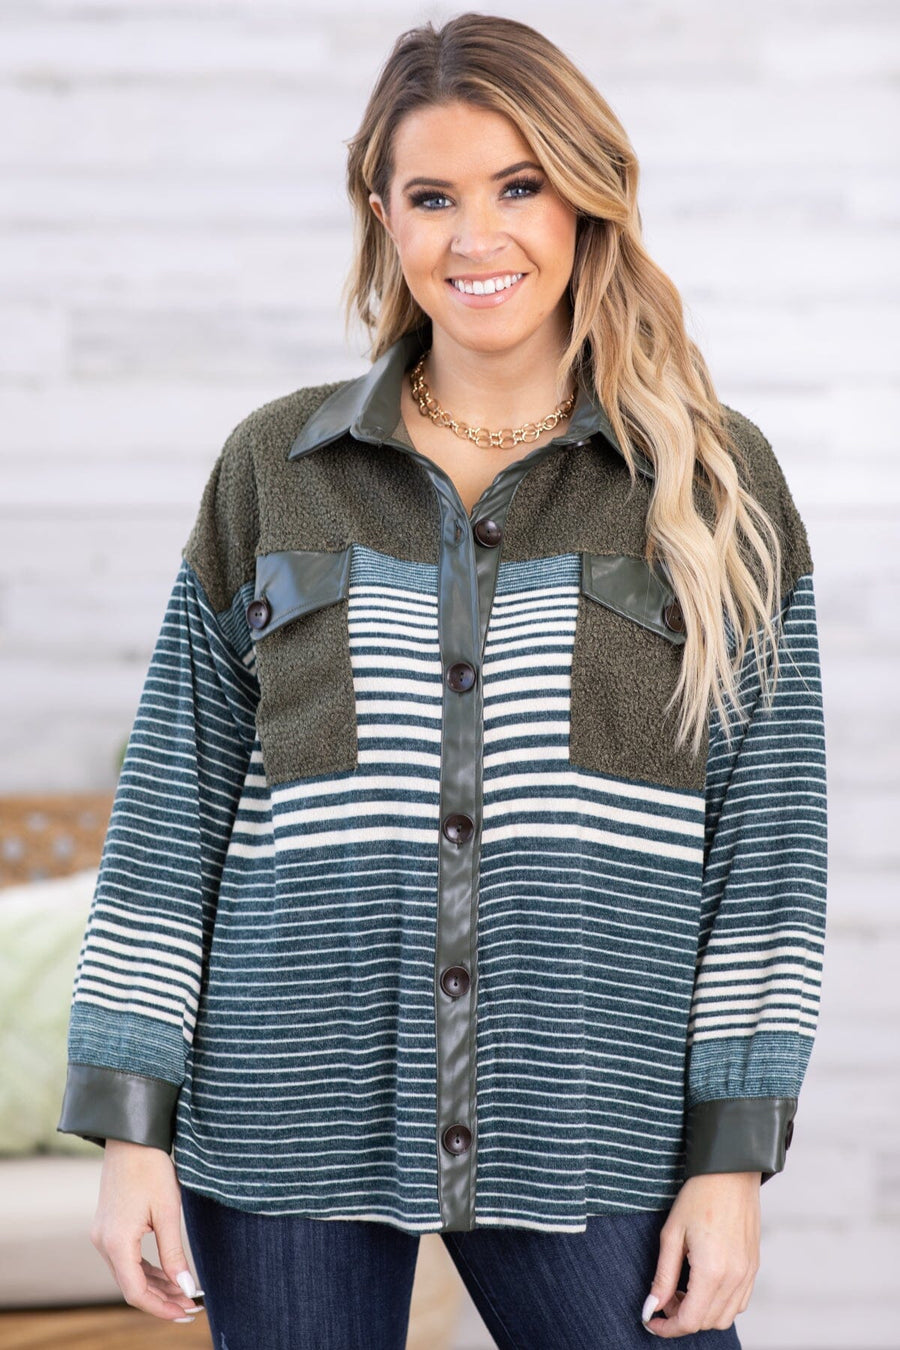 Hunter Green and Teal Striped Jacket - Filly Flair